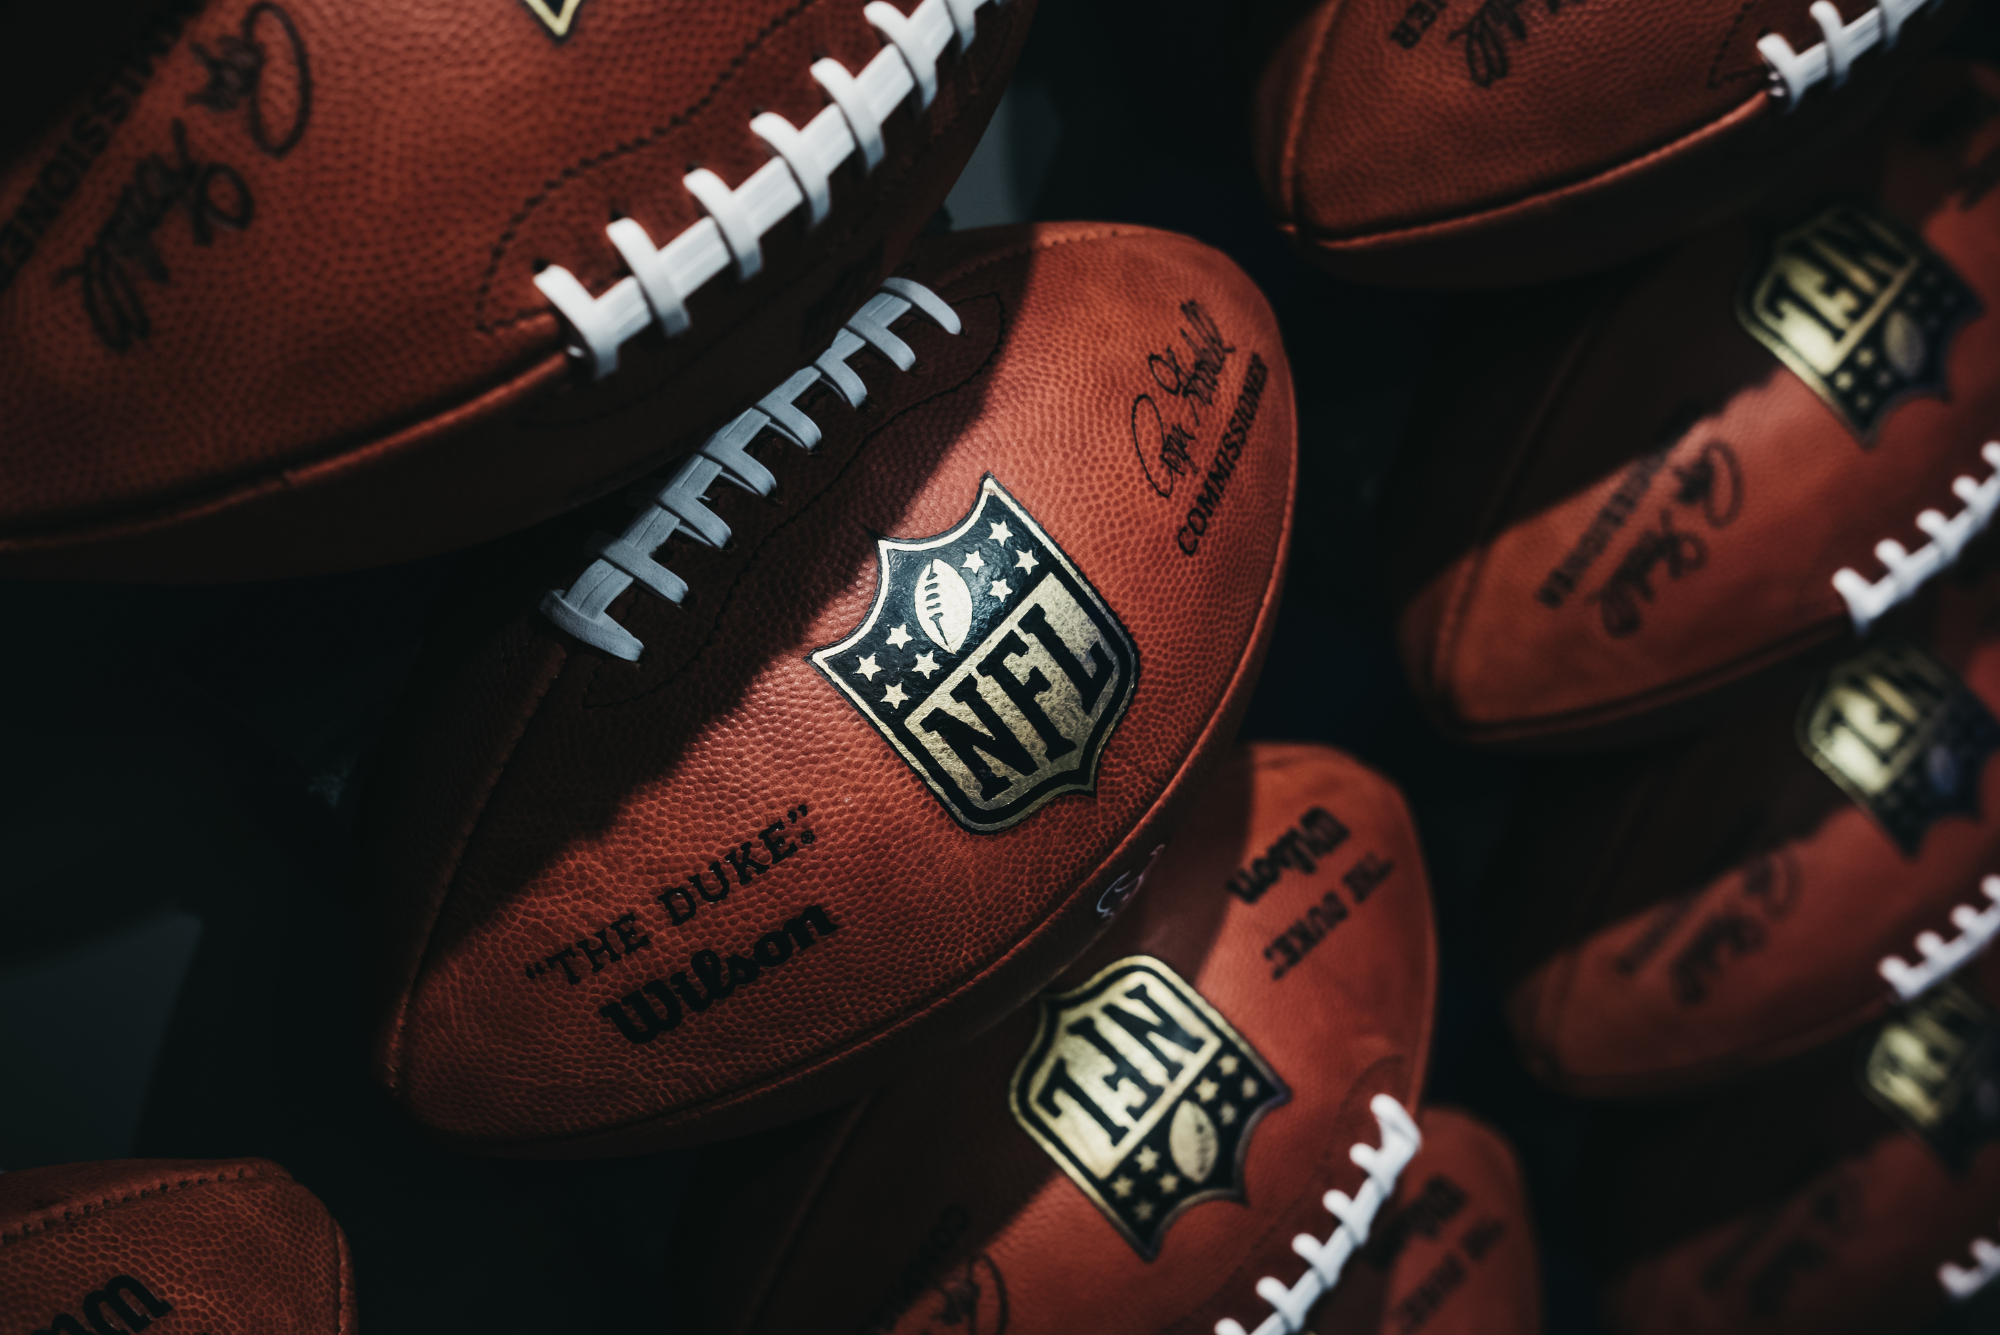 A bunch of official NFL game balls are piled up, representing how sports teams are dropping the ball when it comes to ticket sales.